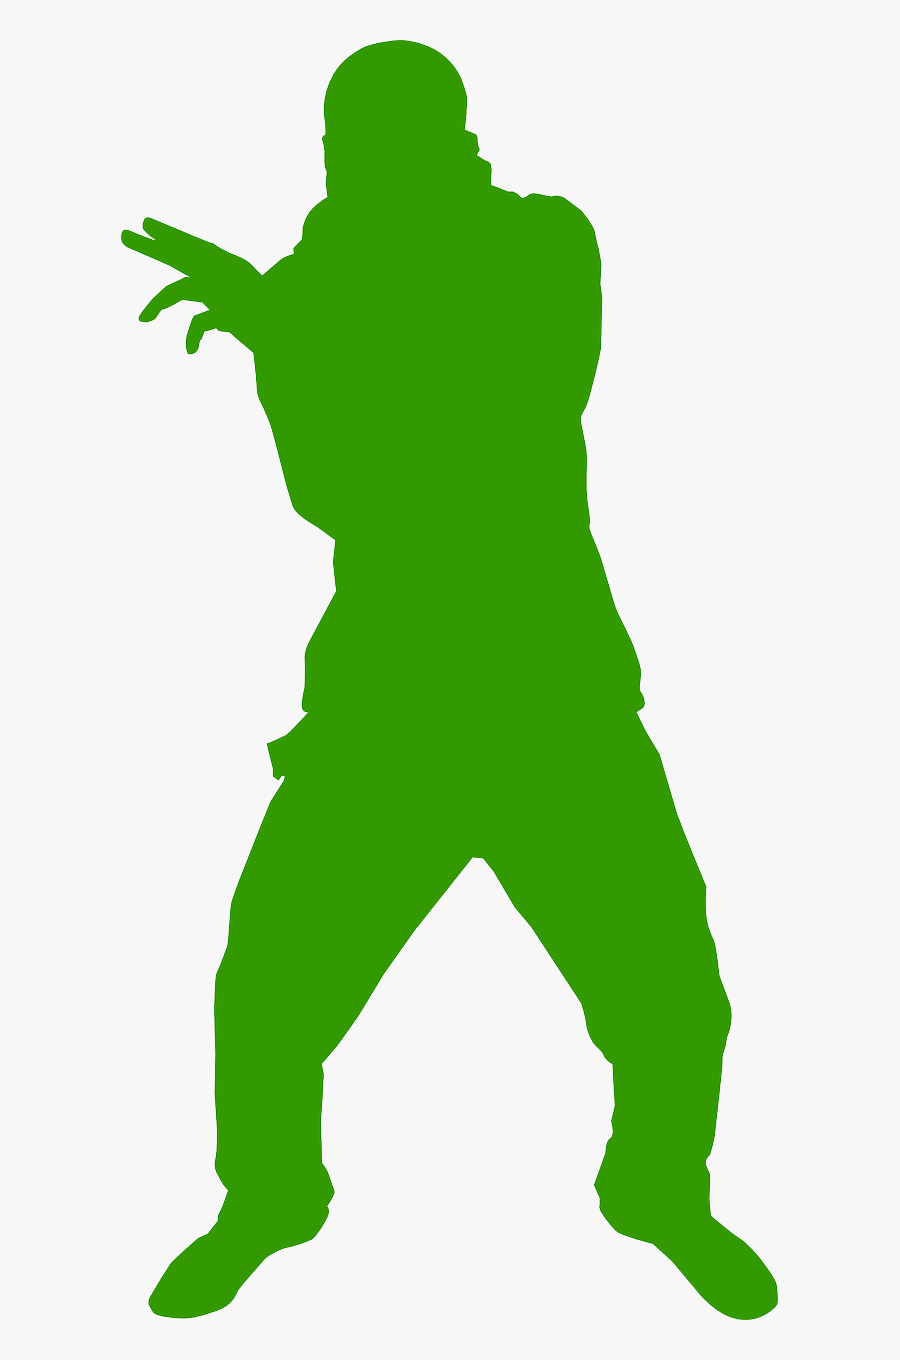 Cool Dancer - Male Green Silhouette Png, Transparent Clipart